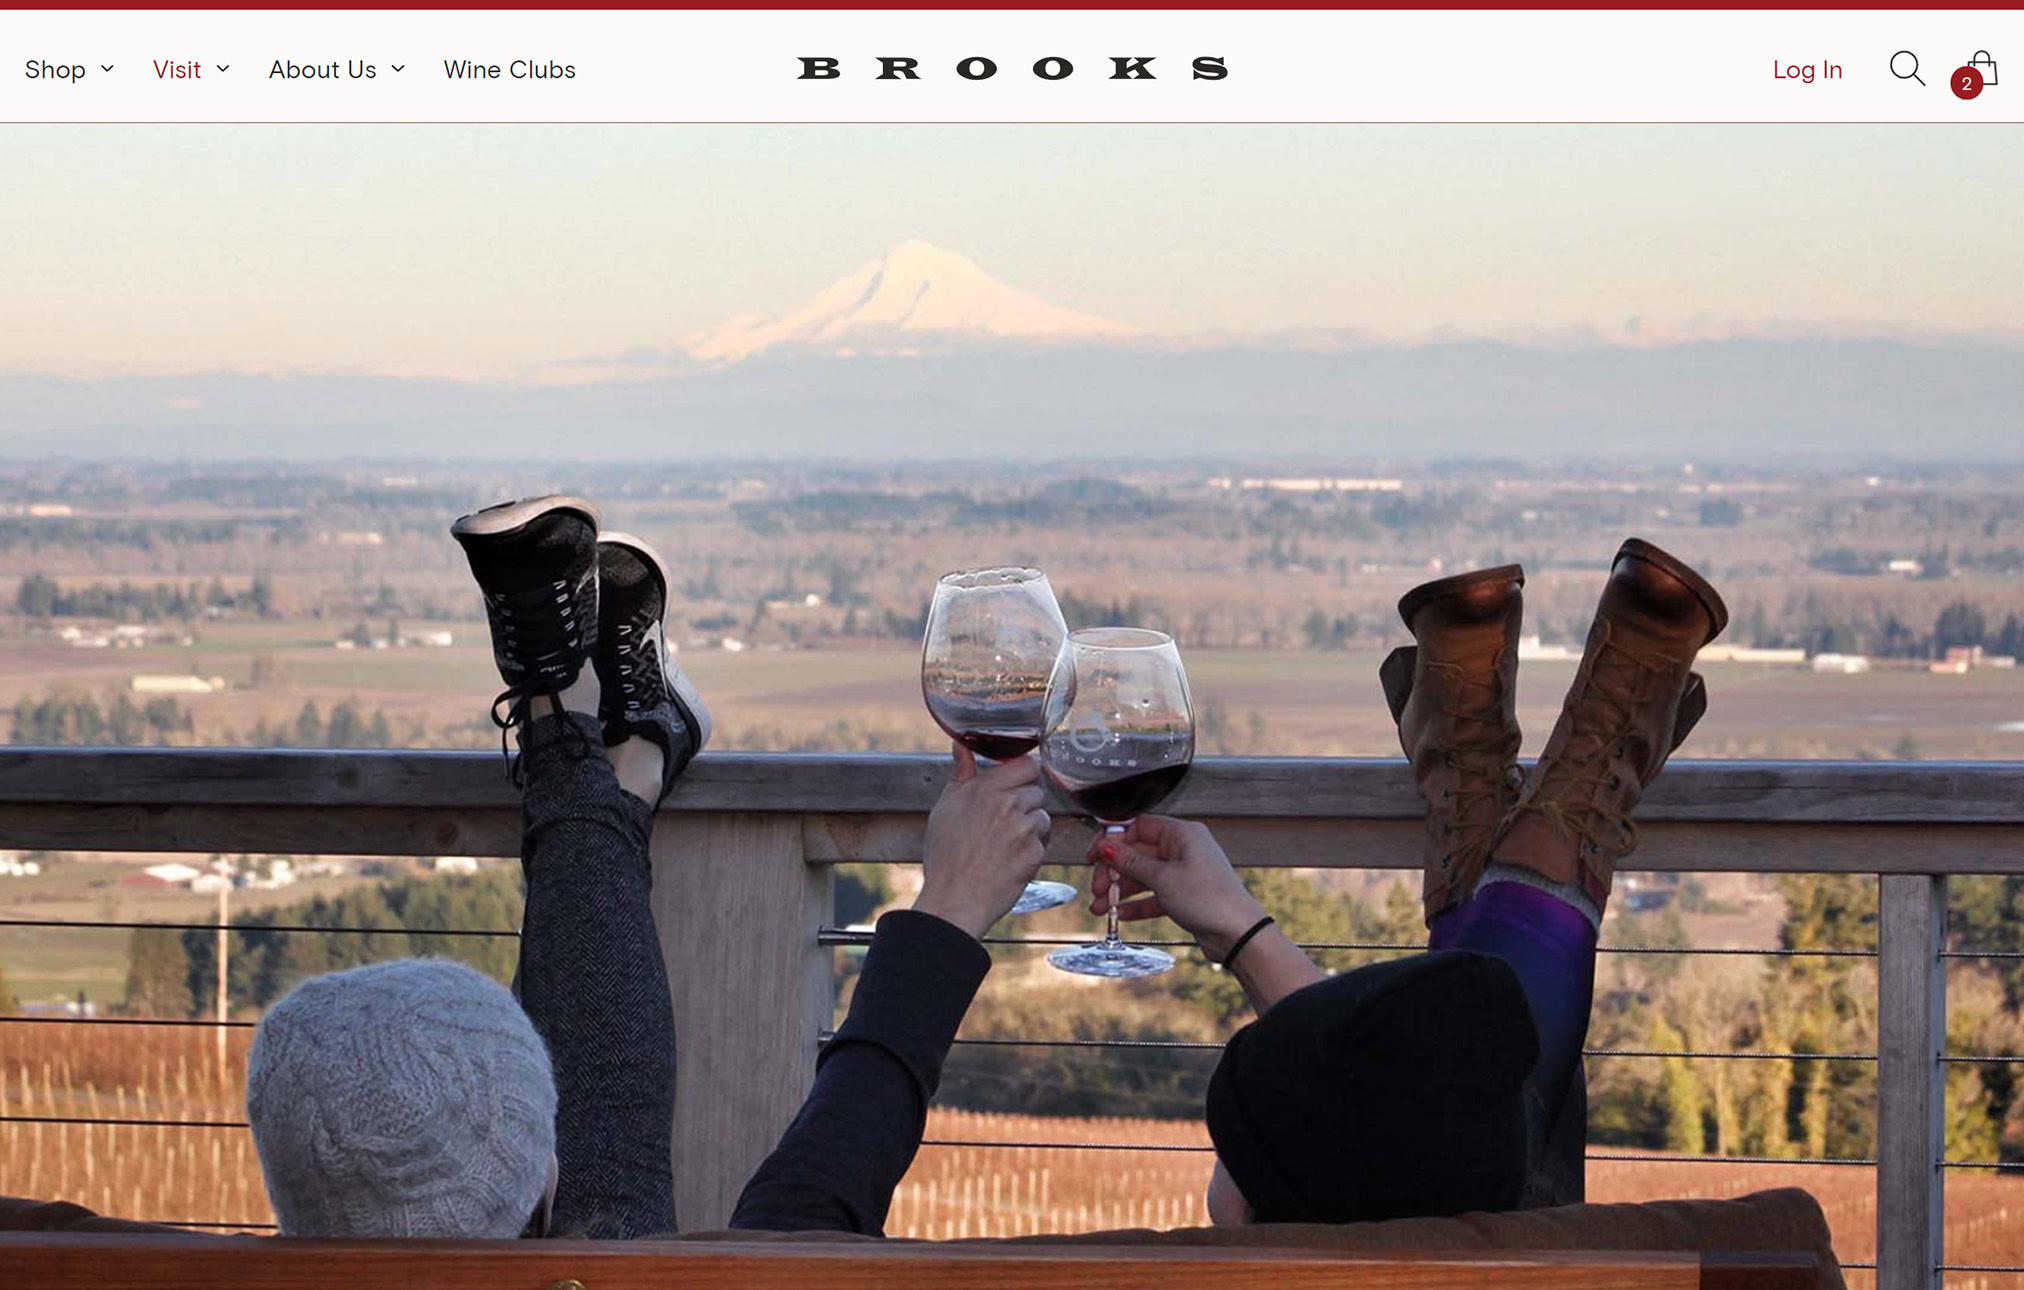 Two people, seated casually with their feet on a railing, clink wine glasses with a scenic vista of a vast valley and distant mount hood in the background, under a clear sky.